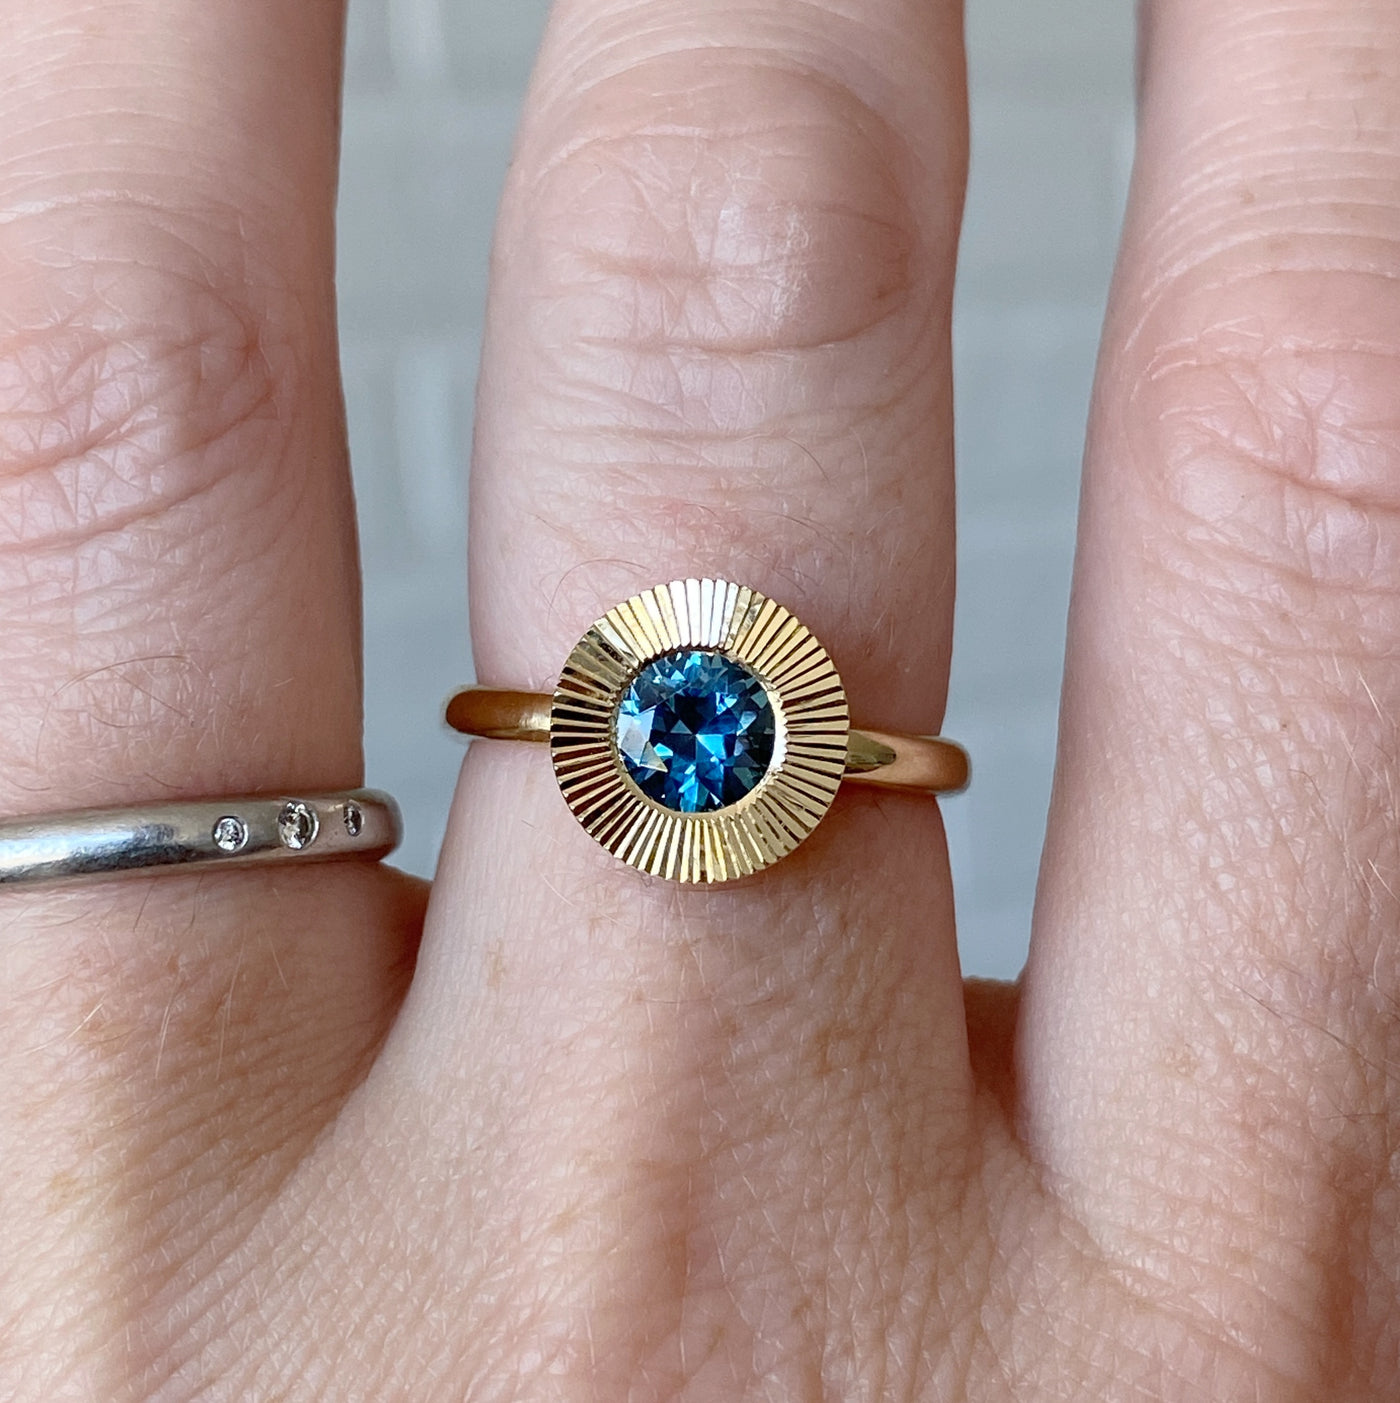 Round Teal Montana sapphire in a 14k yellow gold Aurora ring with an engraved halo border on a hand